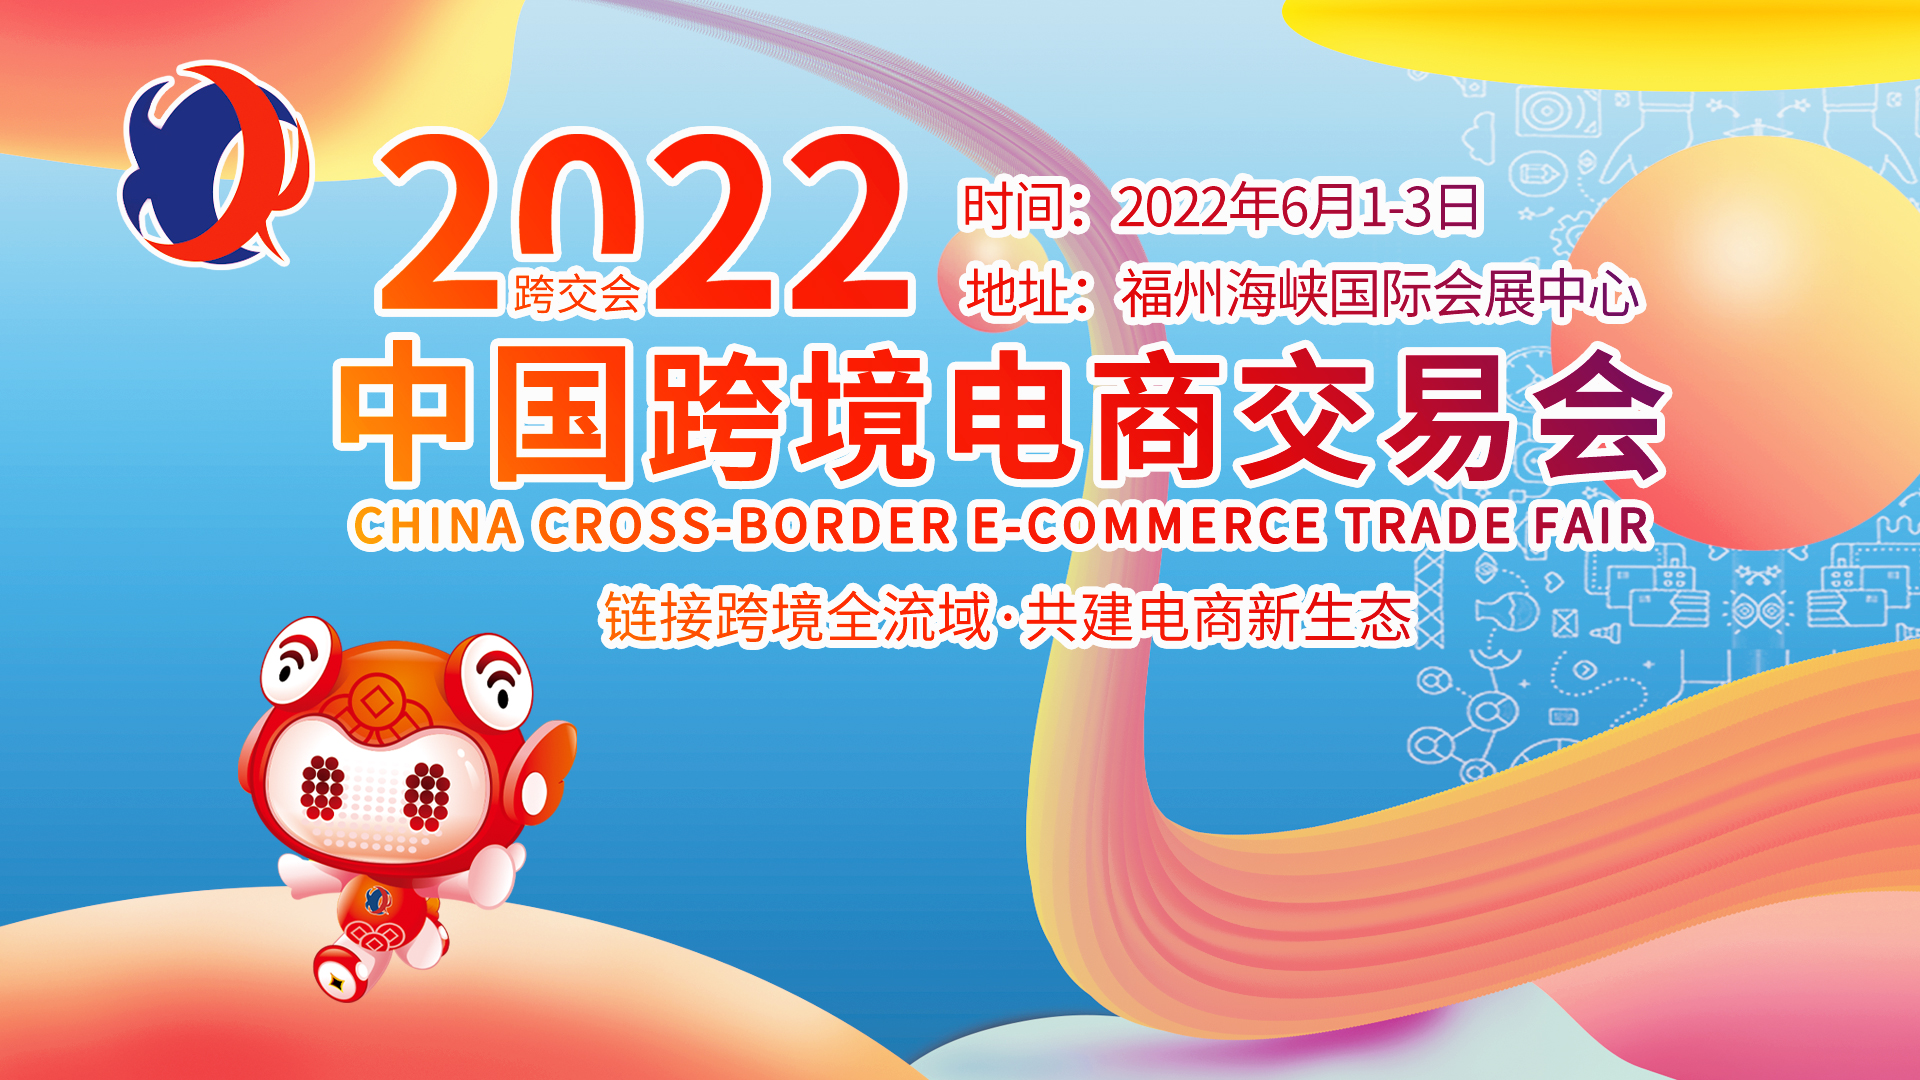 Is it difficult to book a hotel during the exhibition?Check out the 2022 Cross-Trade Fair booking guide!